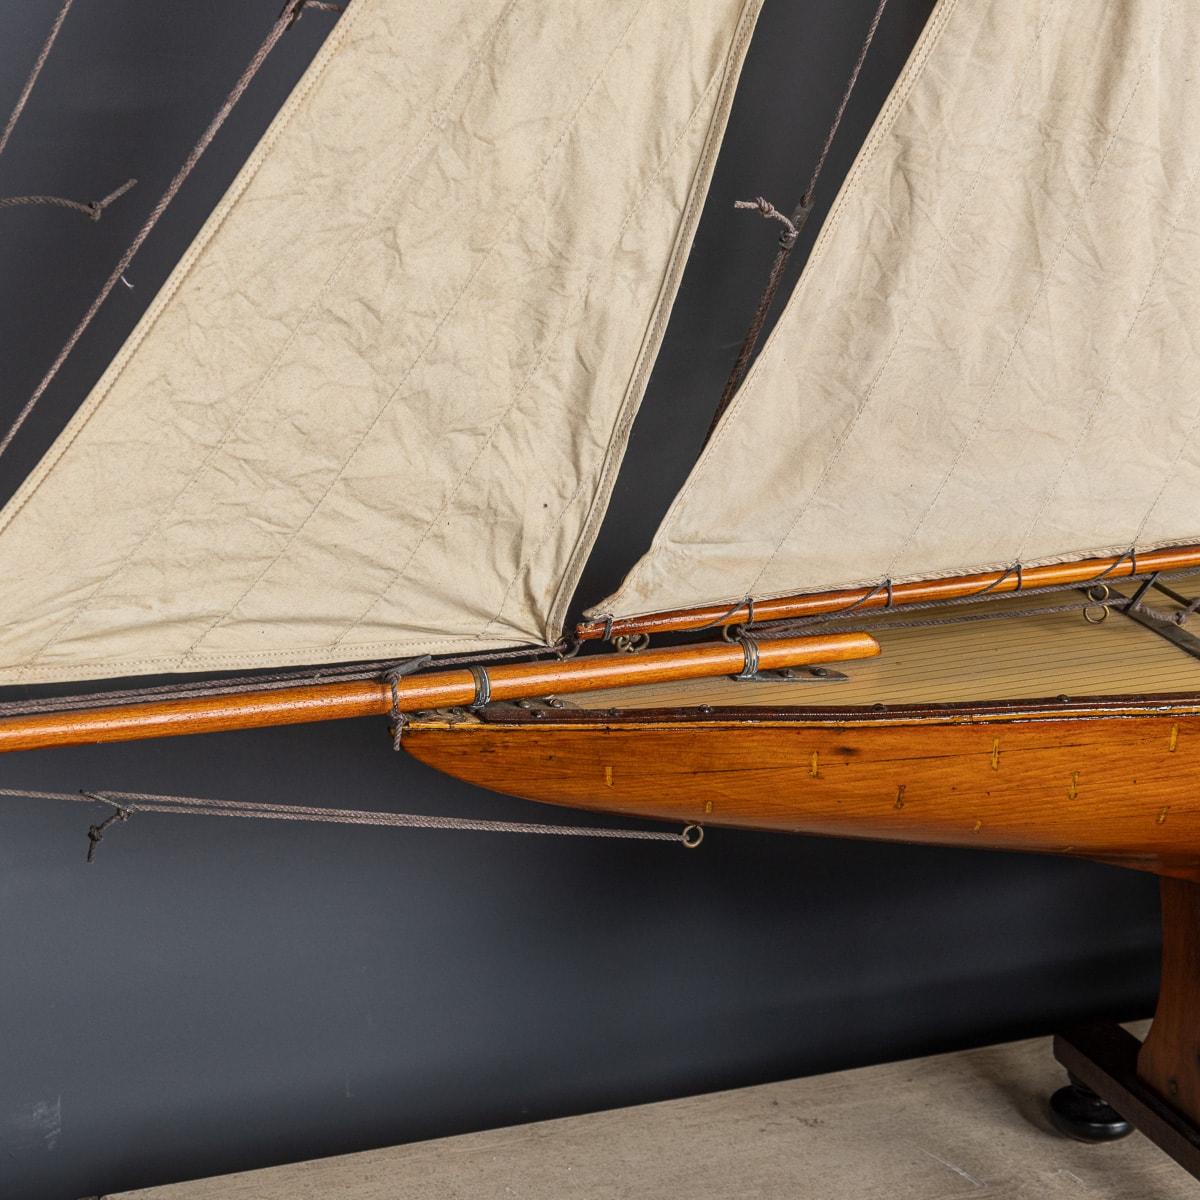 20th Century Large English Made Wooden Pond Yacht c.1930 In Good Condition For Sale In Royal Tunbridge Wells, Kent